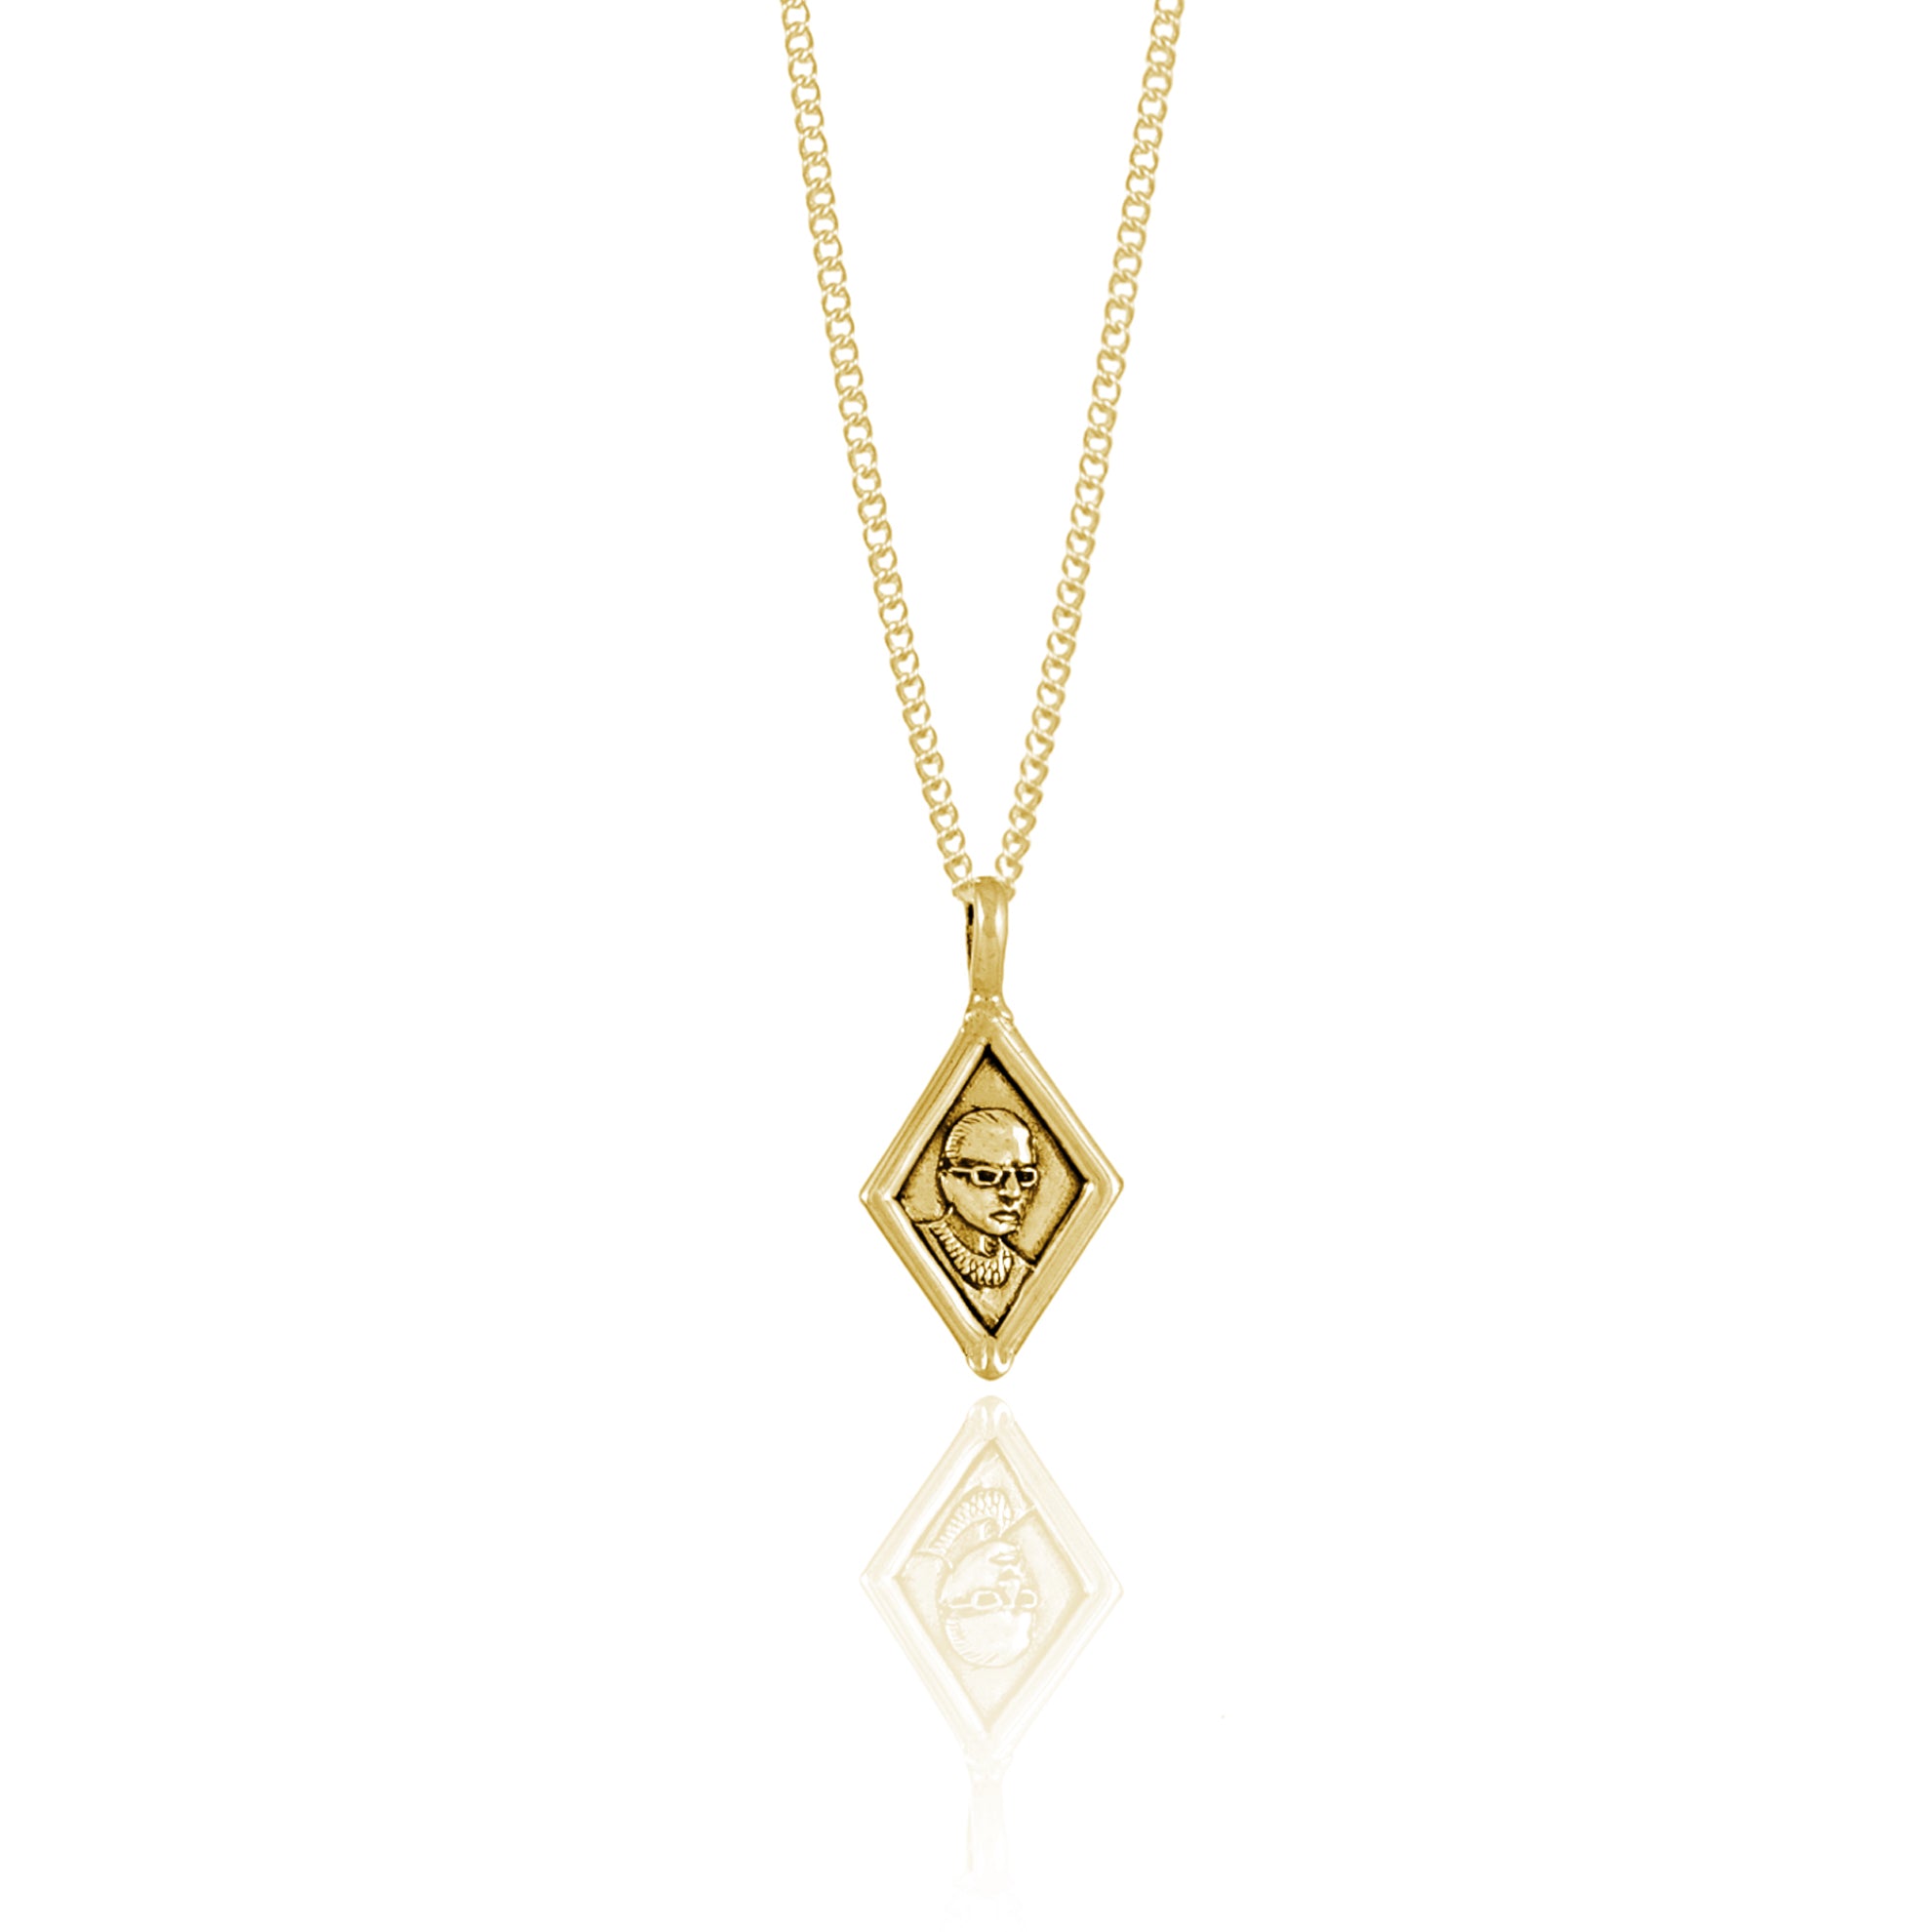 Ruth Bader Ginsberg Pendant for Equality Necklace - Gold